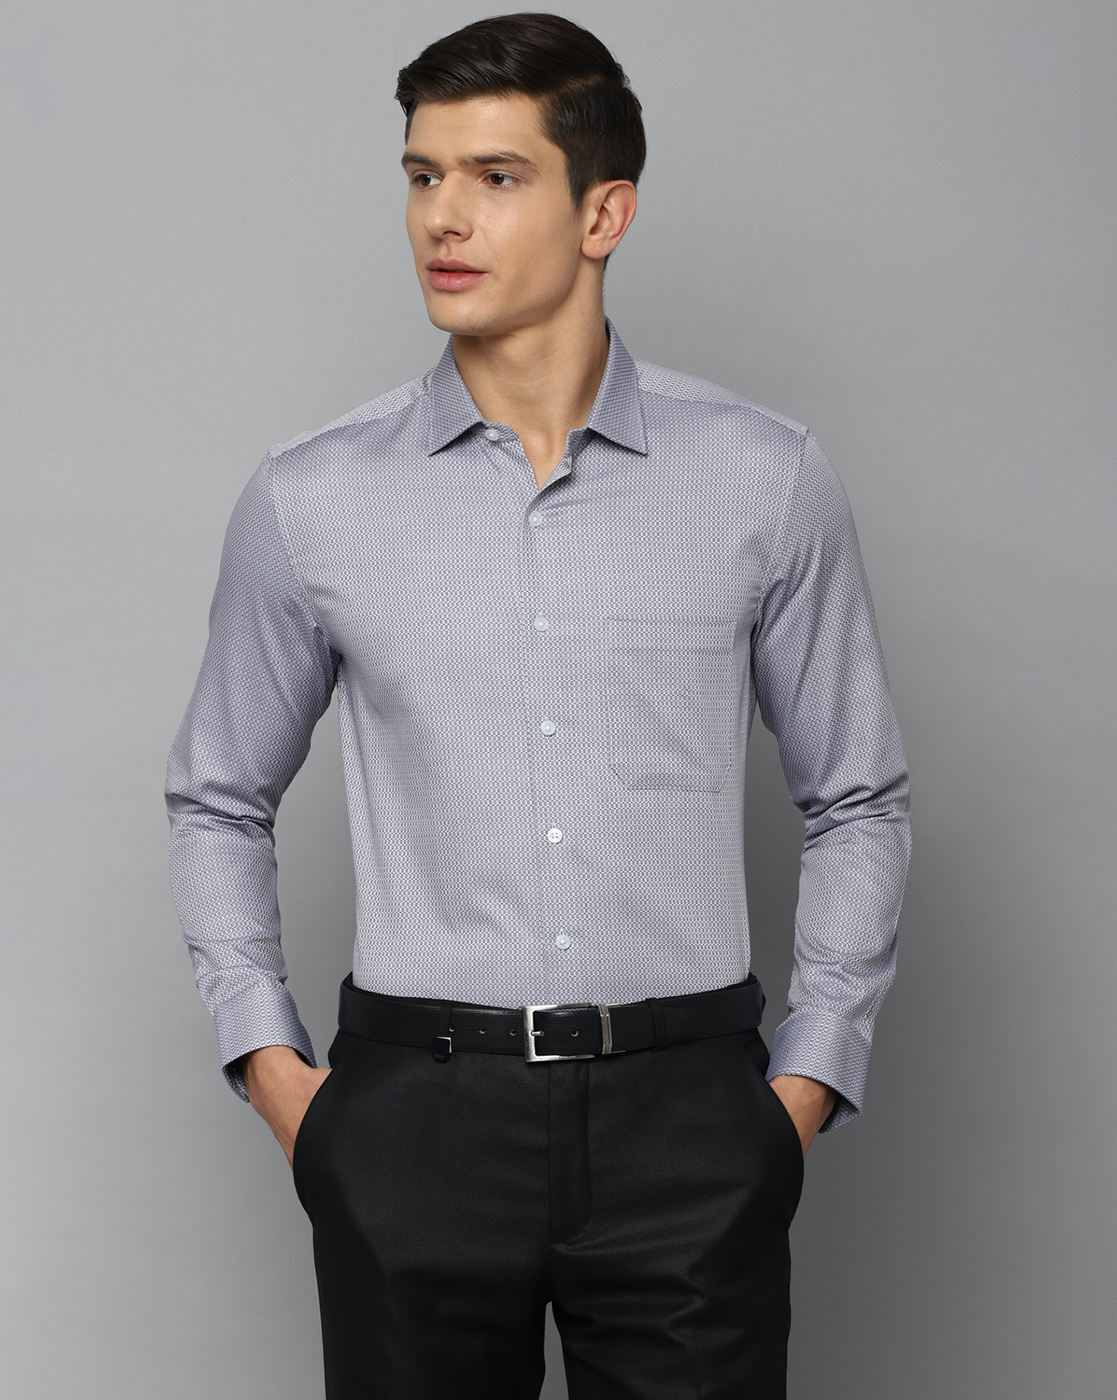 Men'S Stylish And Simple Long Sleeved With Collar Plain Grey Cotton Formal  Shirts at Best Price in Murshidabad | Indican